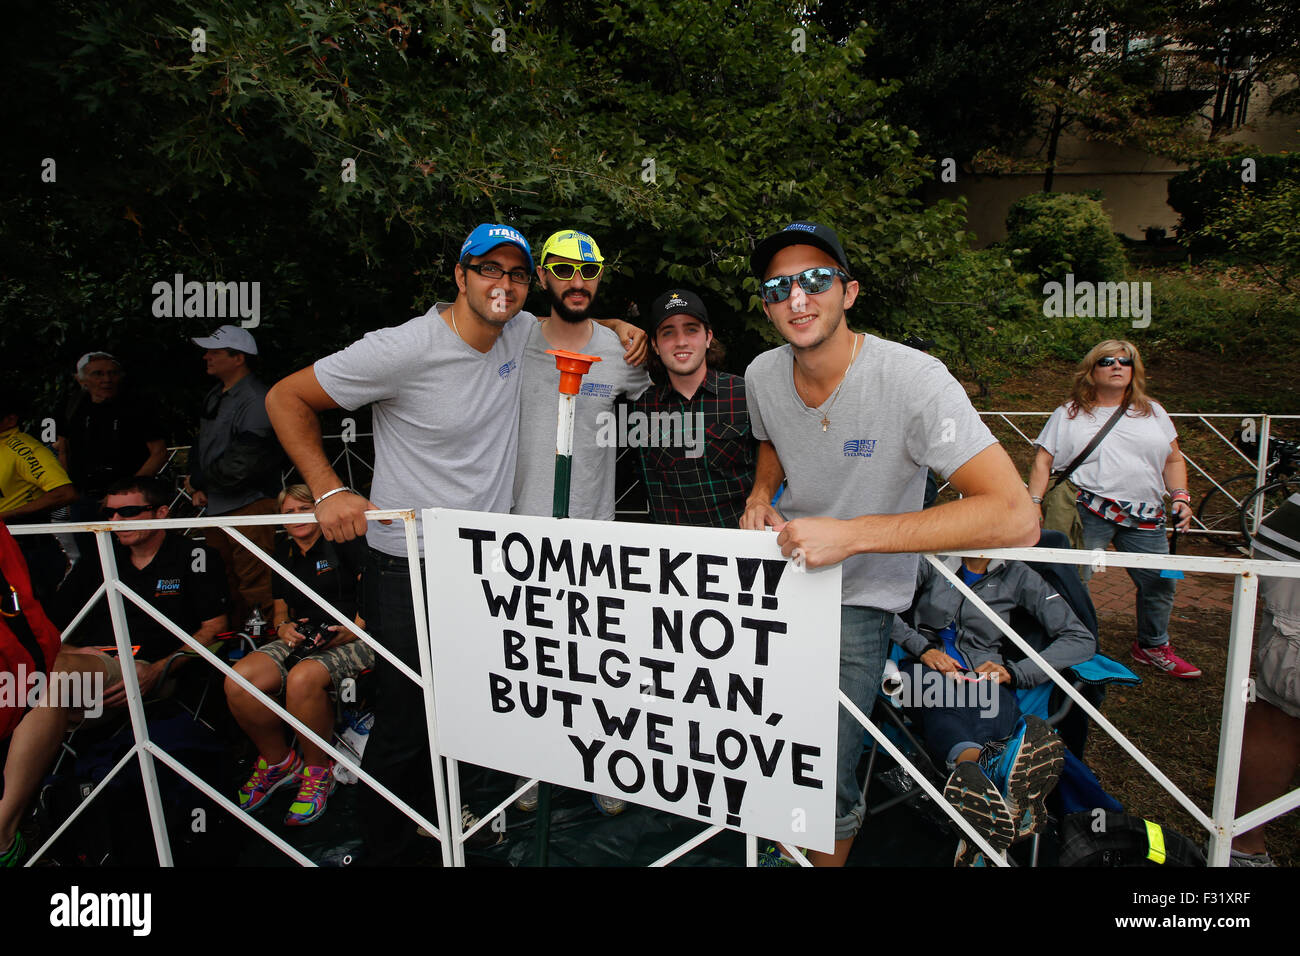 RICHMOND, VIRGINIA, 27 Sept., 2015. Eric Mikos, Christian Mambelli, Jared Mazur, and Cameron Pinto travelled from their homes in New Jersey to Libby Hill Park in Richmond, Virginia to support Belgian cycling superstar Tom Boonen. Credit:  Ironstring/Alamy Live News Stock Photo